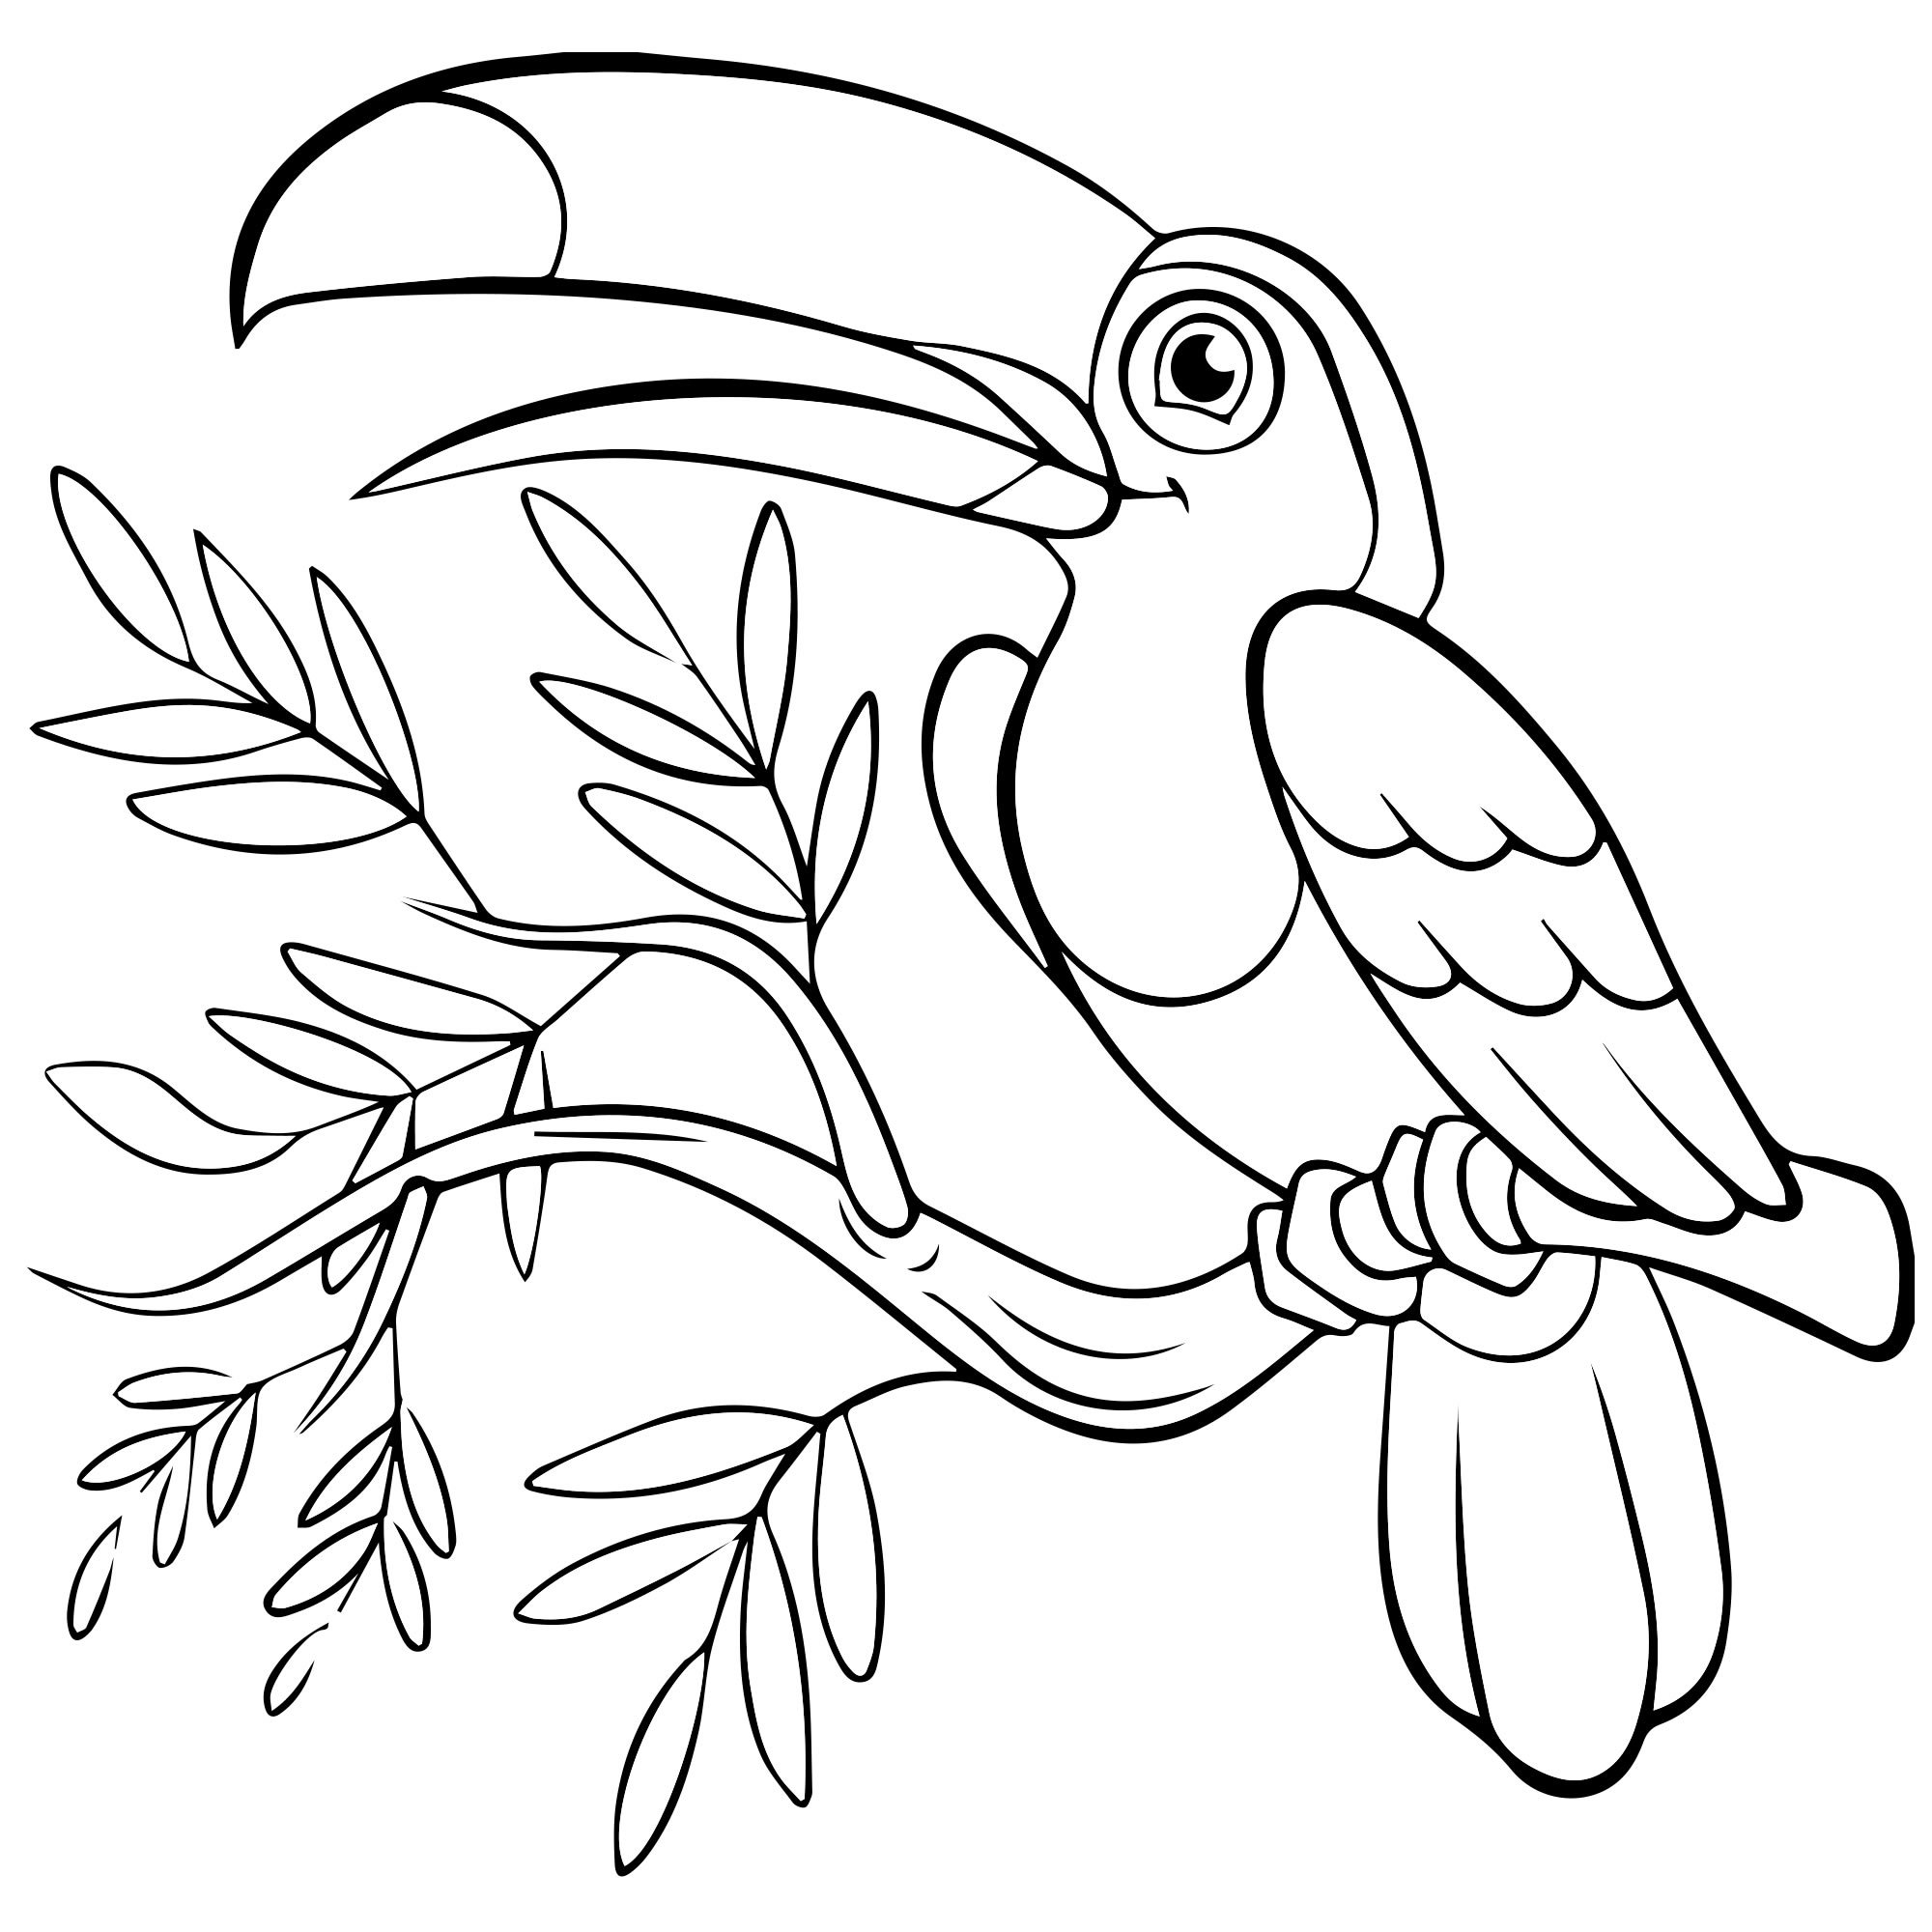 Exciting bird coloring book for kids